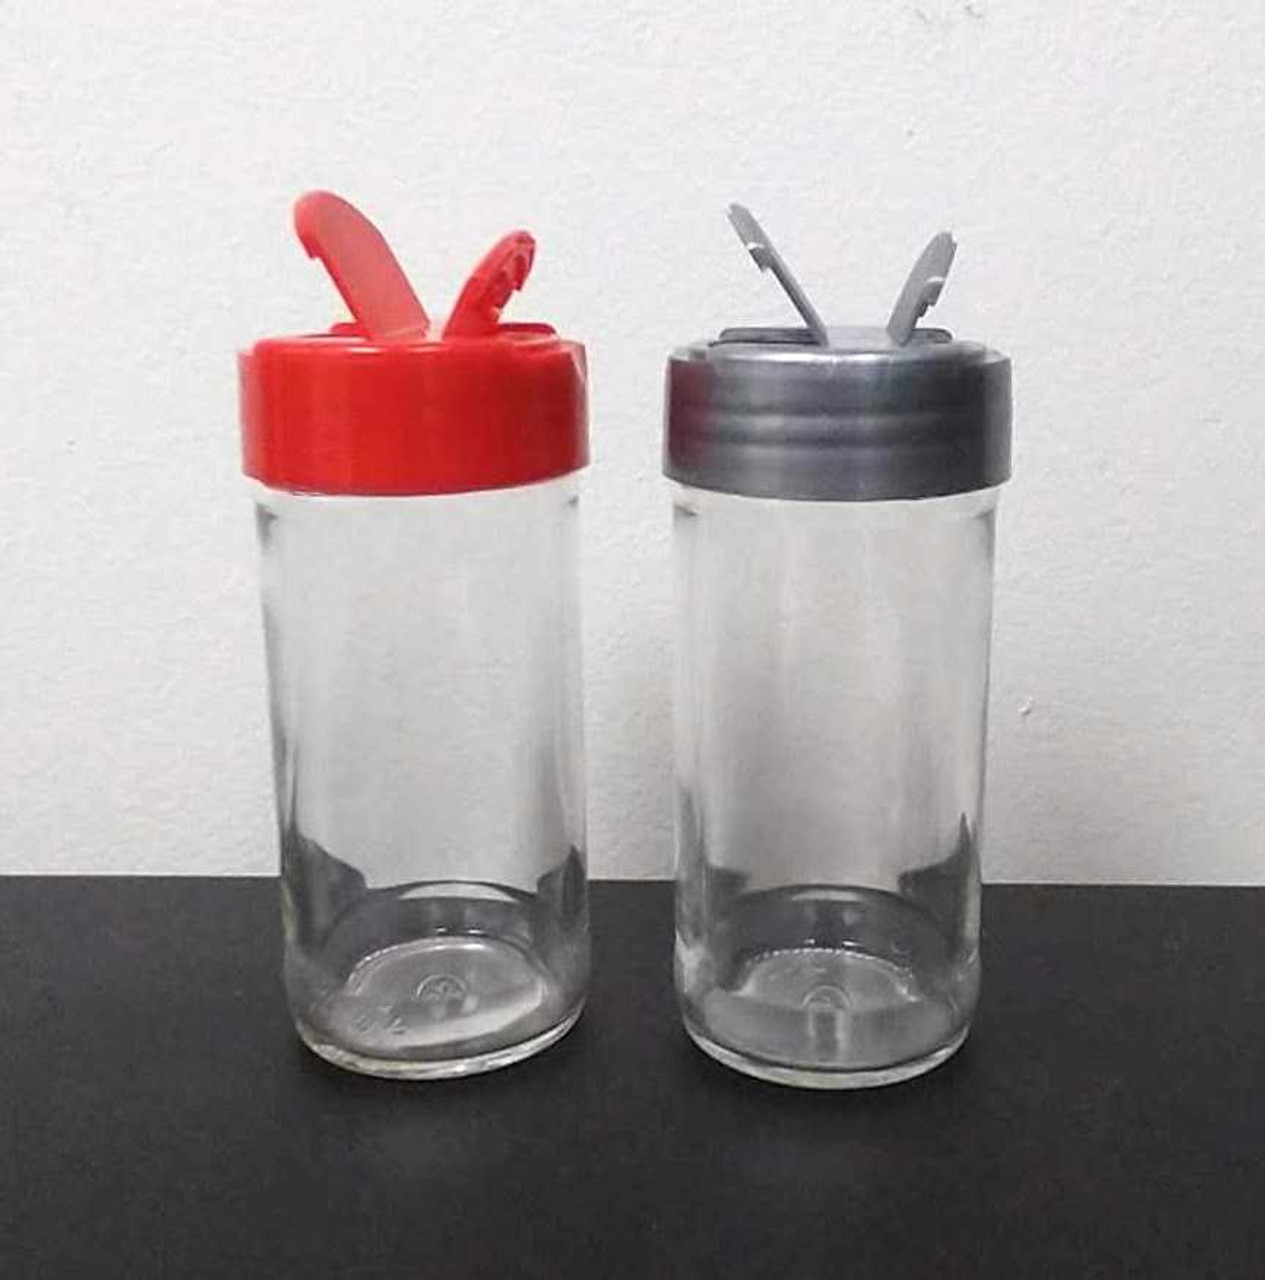 https://cdn11.bigcommerce.com/s-1ybtx/images/stencil/1280x1280/products/1253/6636/4-oz-Glass-Straight-Sided-Spice-Jars-with-Your-Choice-of-Lids_4308__51004.1674335736.jpg?c=2?imbypass=on